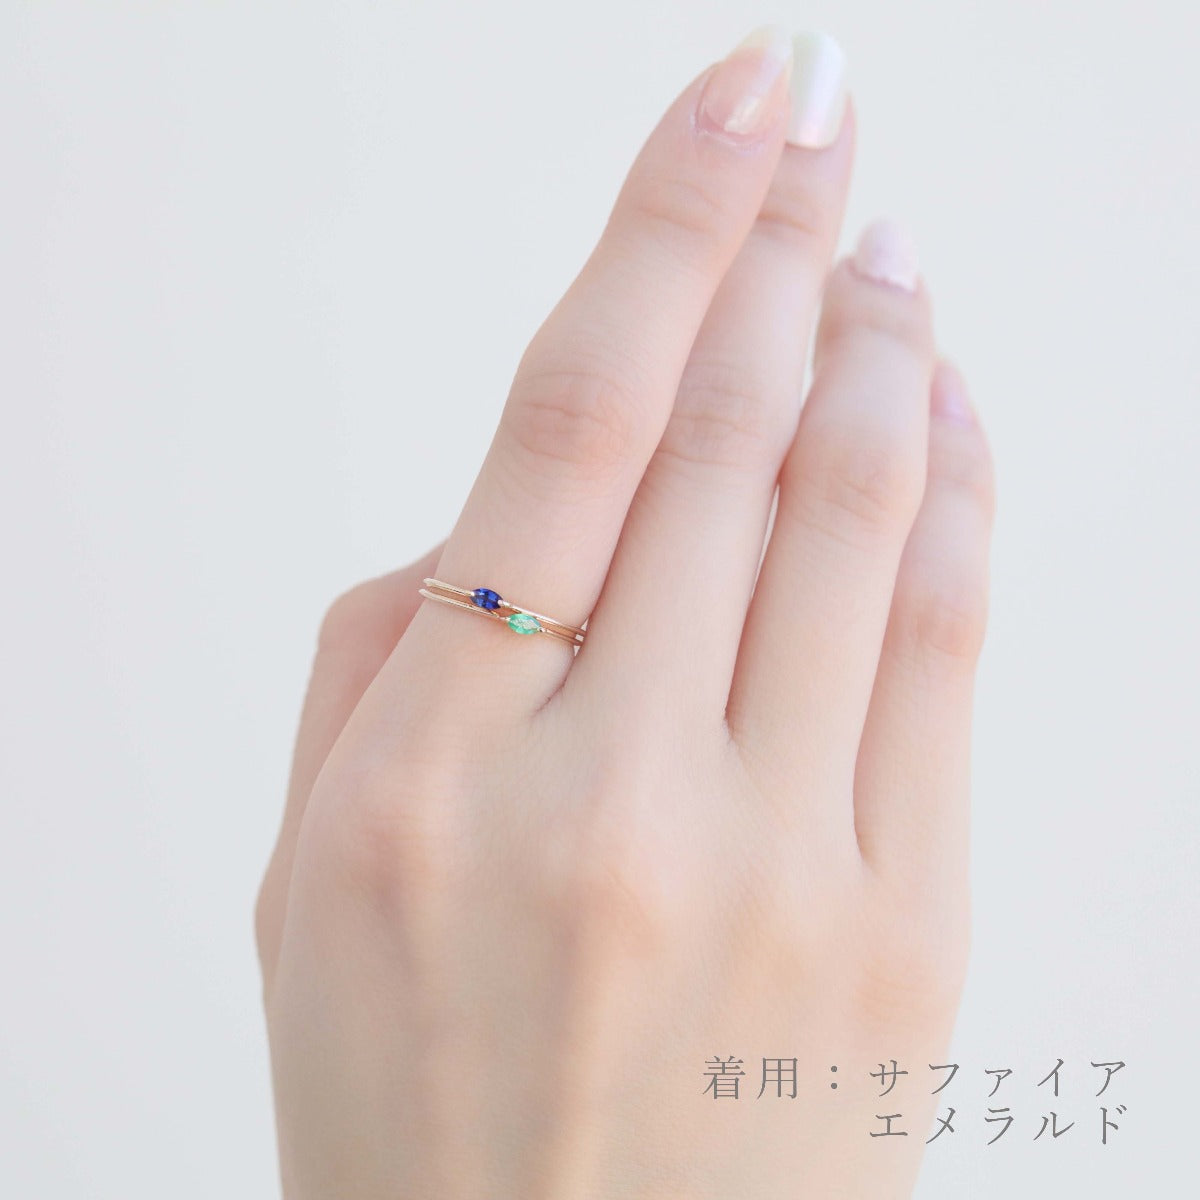 Jewel closet by L&Co. K10 サファイア リング 11号-